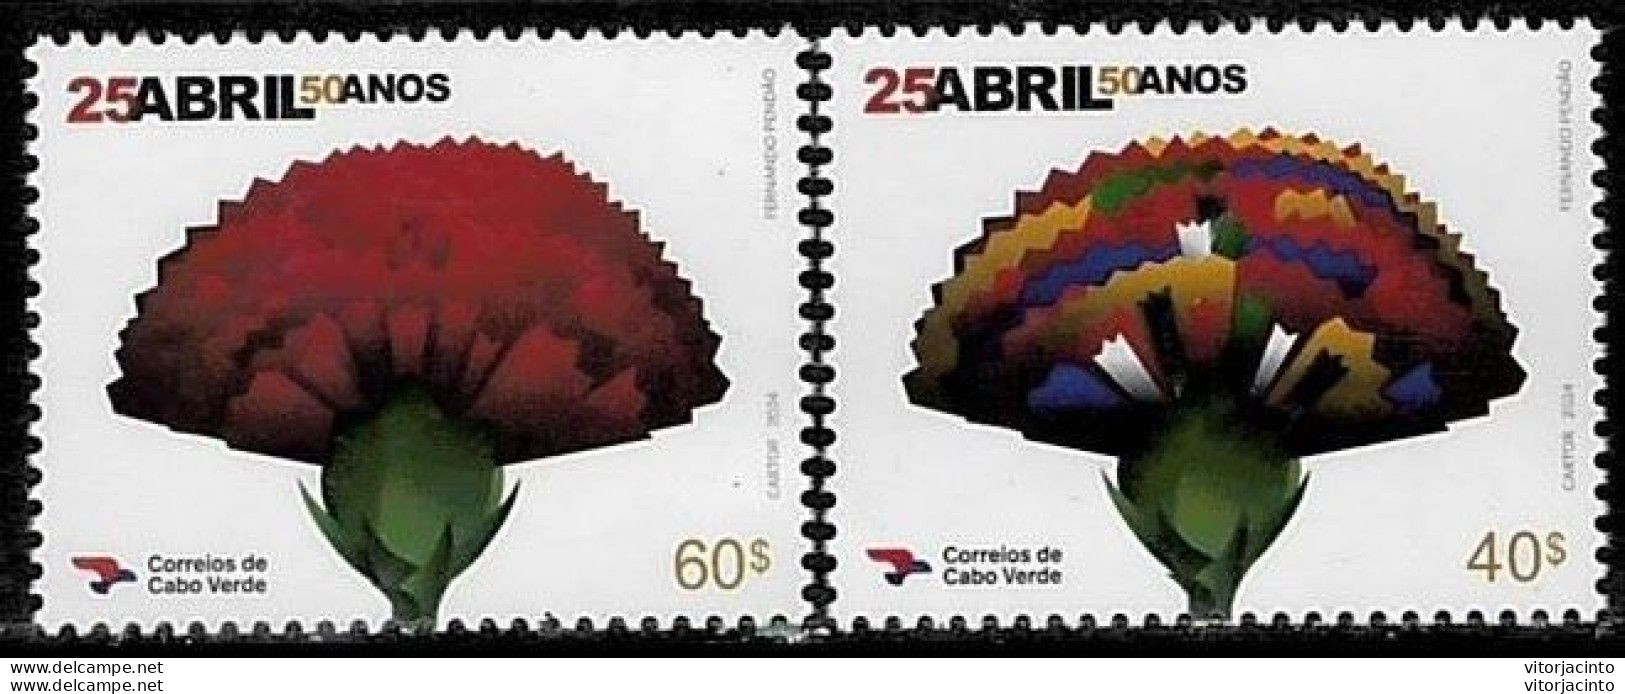 Cape Verde - 25 April - 50 Years - Joint Issue Angola/Cape Verde/Portugal (Mint Stamps) - Date Of Issue: 2024-03-28 - Cape Verde